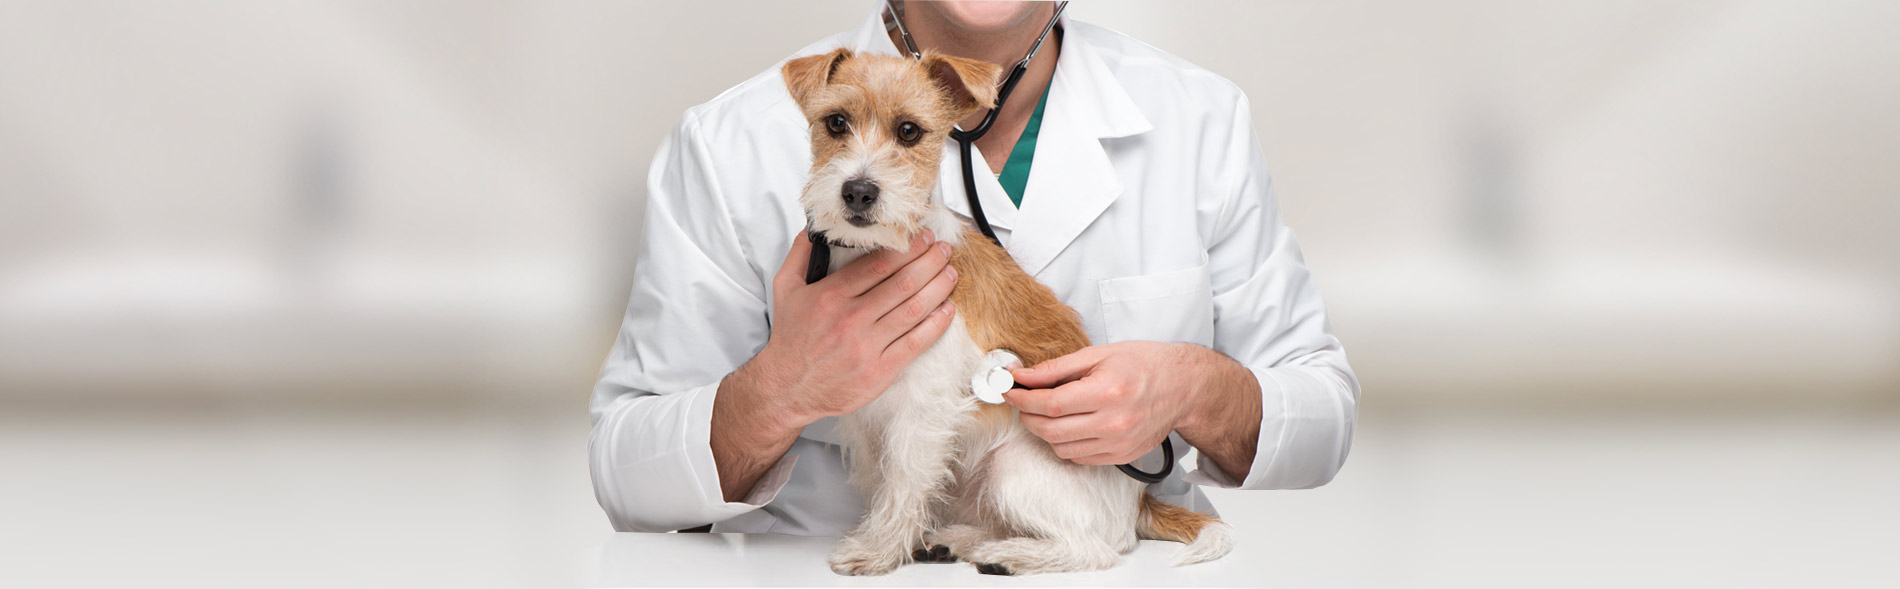 Meriden Animal Hospital Services Page